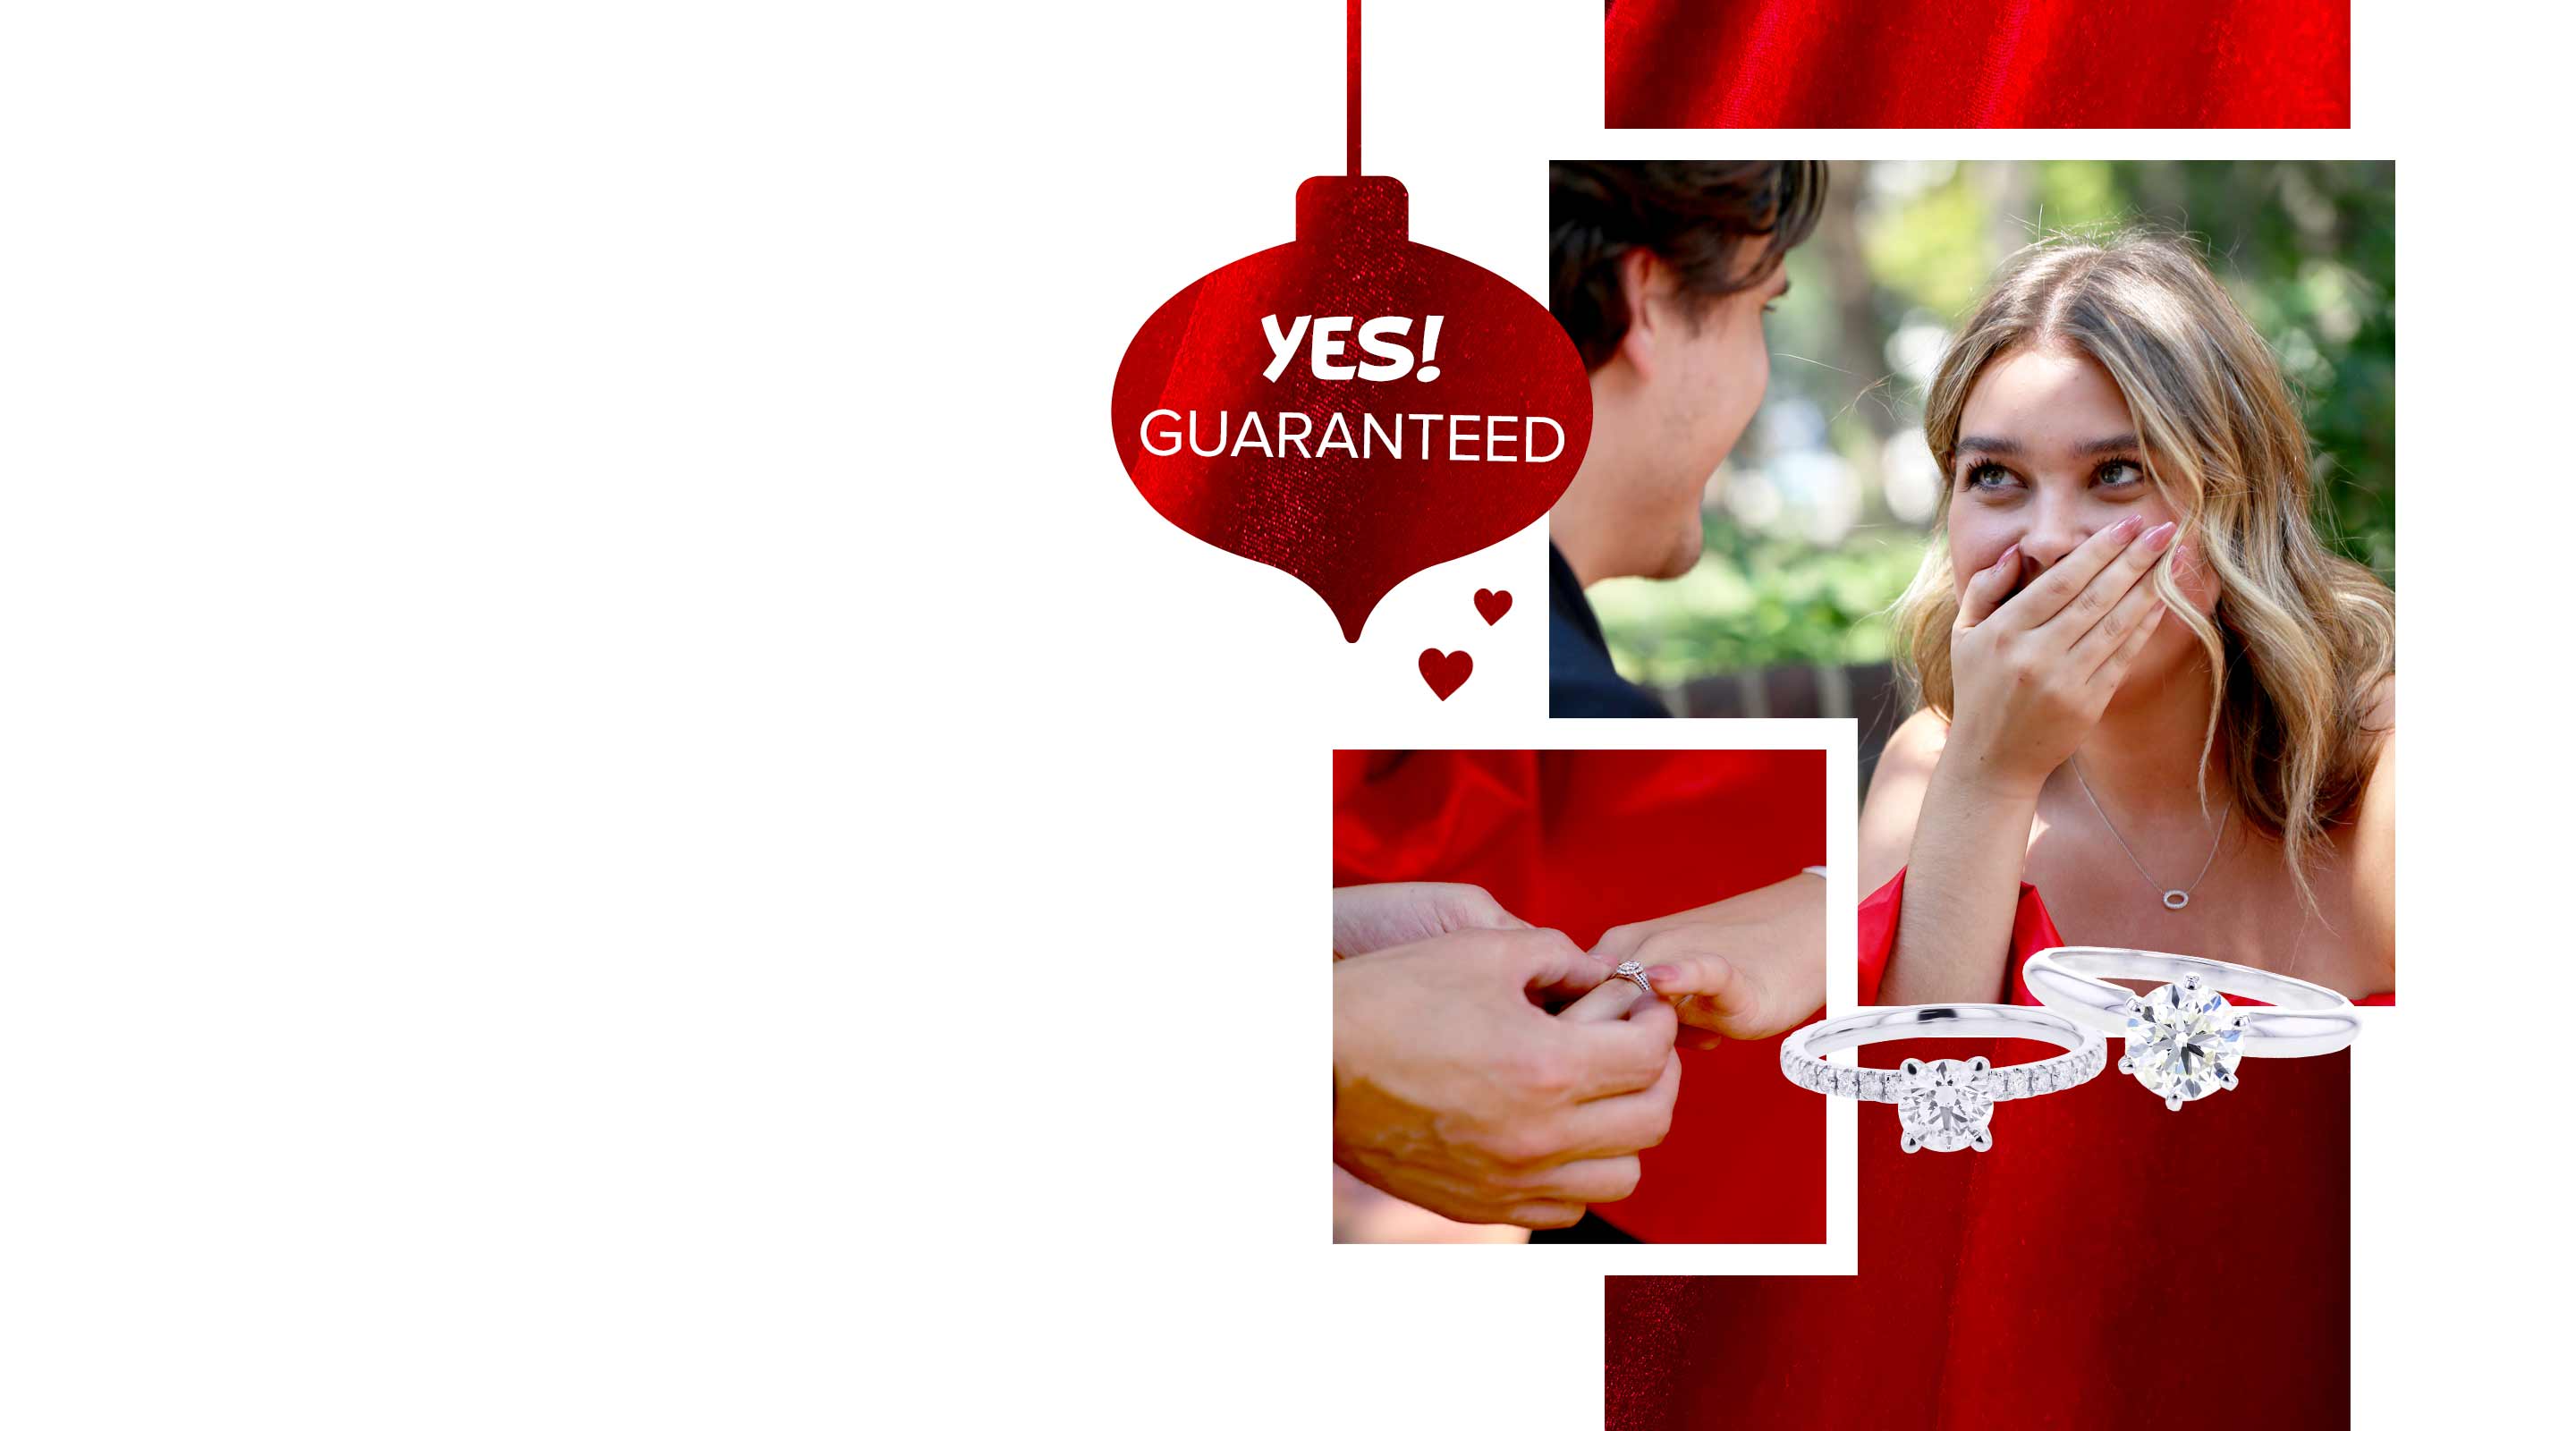 A surprised women in red getting engaged featuring two classic engagement ring styles.